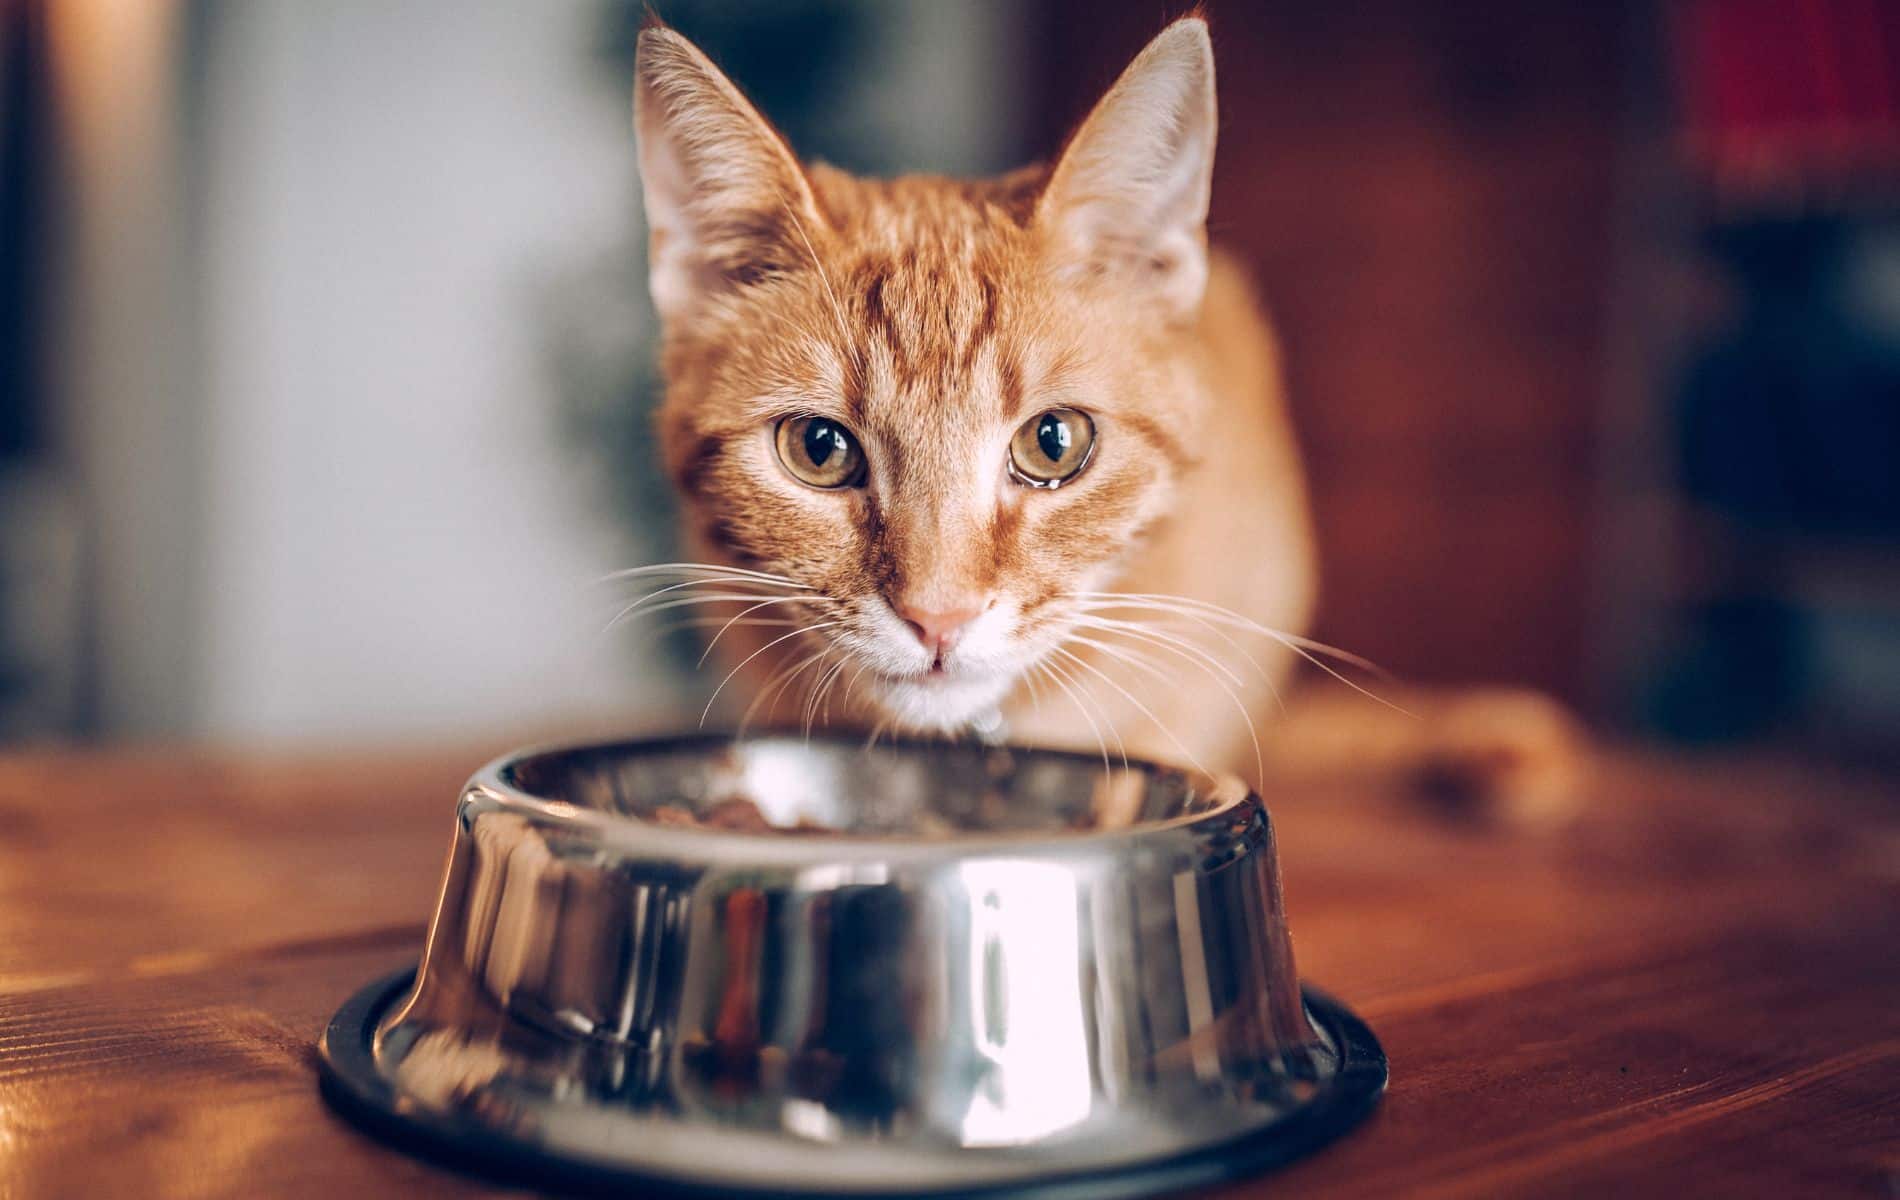 Australian scientists are studying putting cats on a vegetarian diet and the results have been impressive